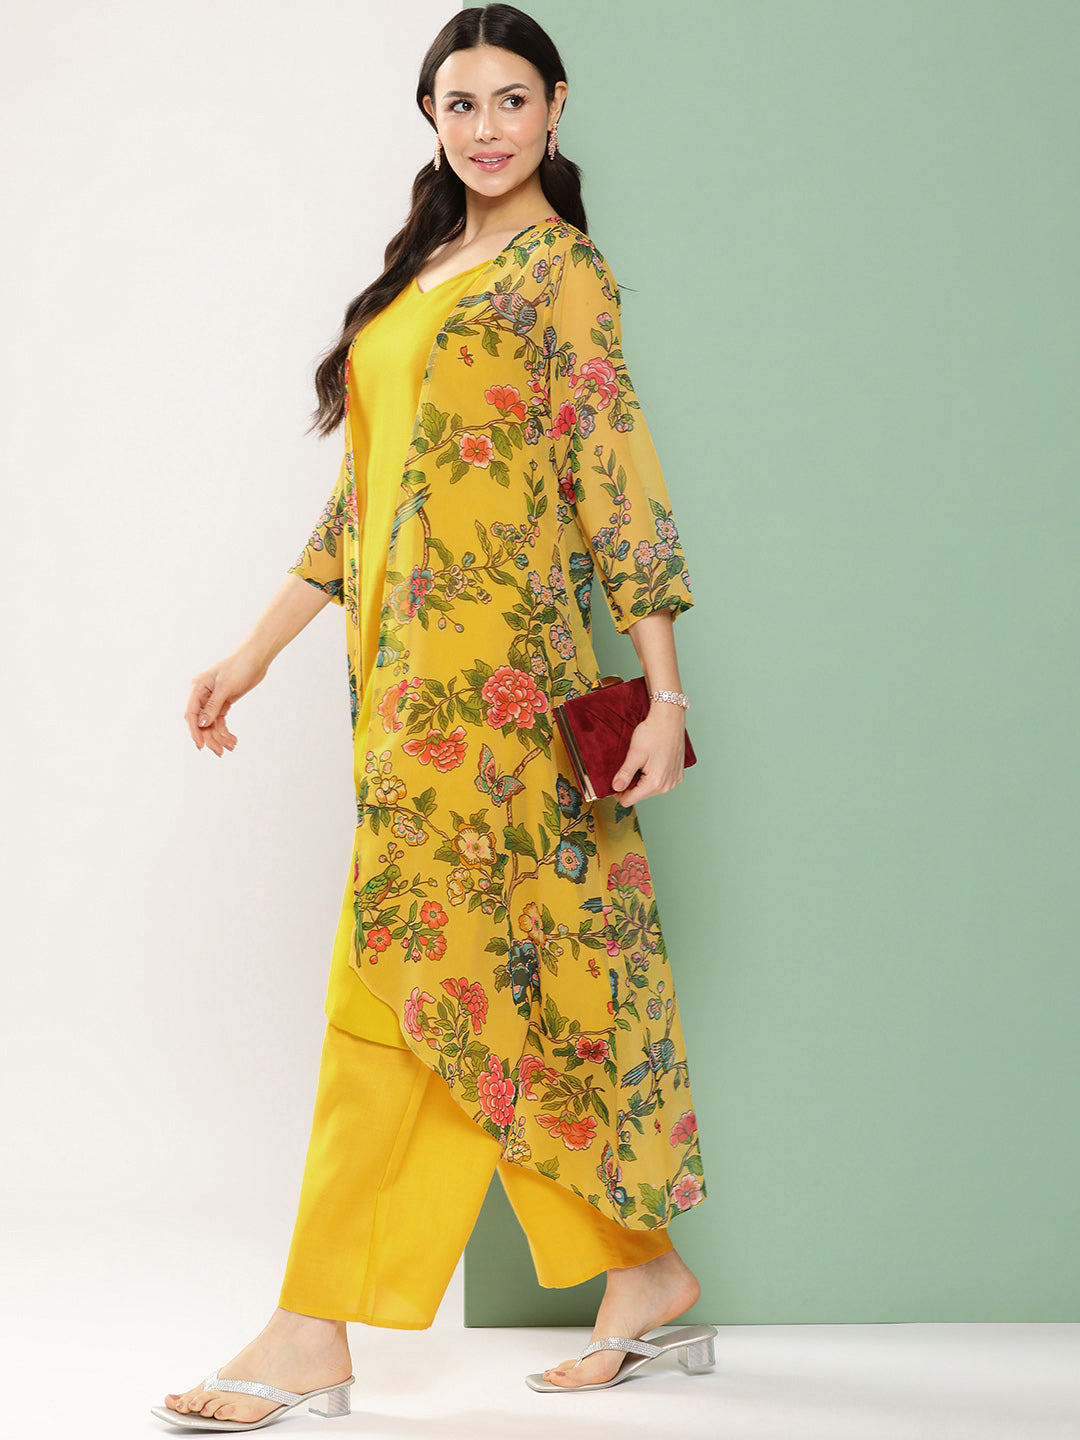 Women's Mustard Floral Printed Jacket, Kurta With Palazzos - Bhama Couture